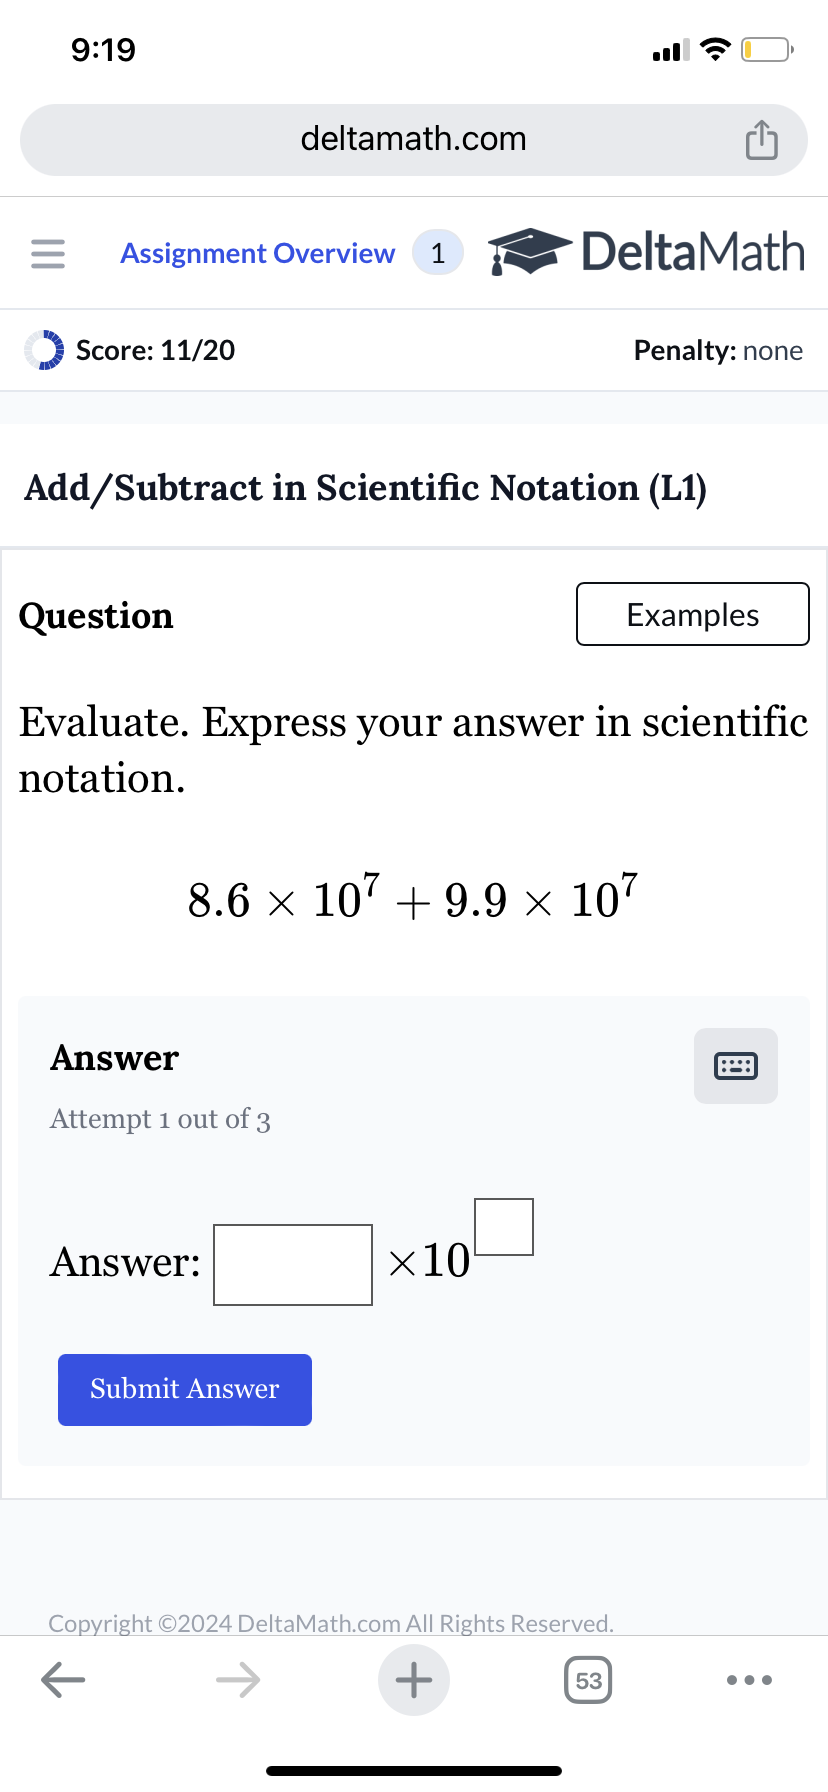 9:19
deltamath.com
= Assignment Overview 1
DeltaMath
Score: 11/20
Penalty: none
Add/Subtract in Scientific Notation (L1)
Question
Examples
Evaluate. Express your answer in scientific
notation.
8.6 × 107 +9.9 × 107
Answer
Attempt 1 out of 3
Answer:
Submit Answer
×10
Copyright ©2024 DeltaMath.com All Rights Reserved.
←
+
53